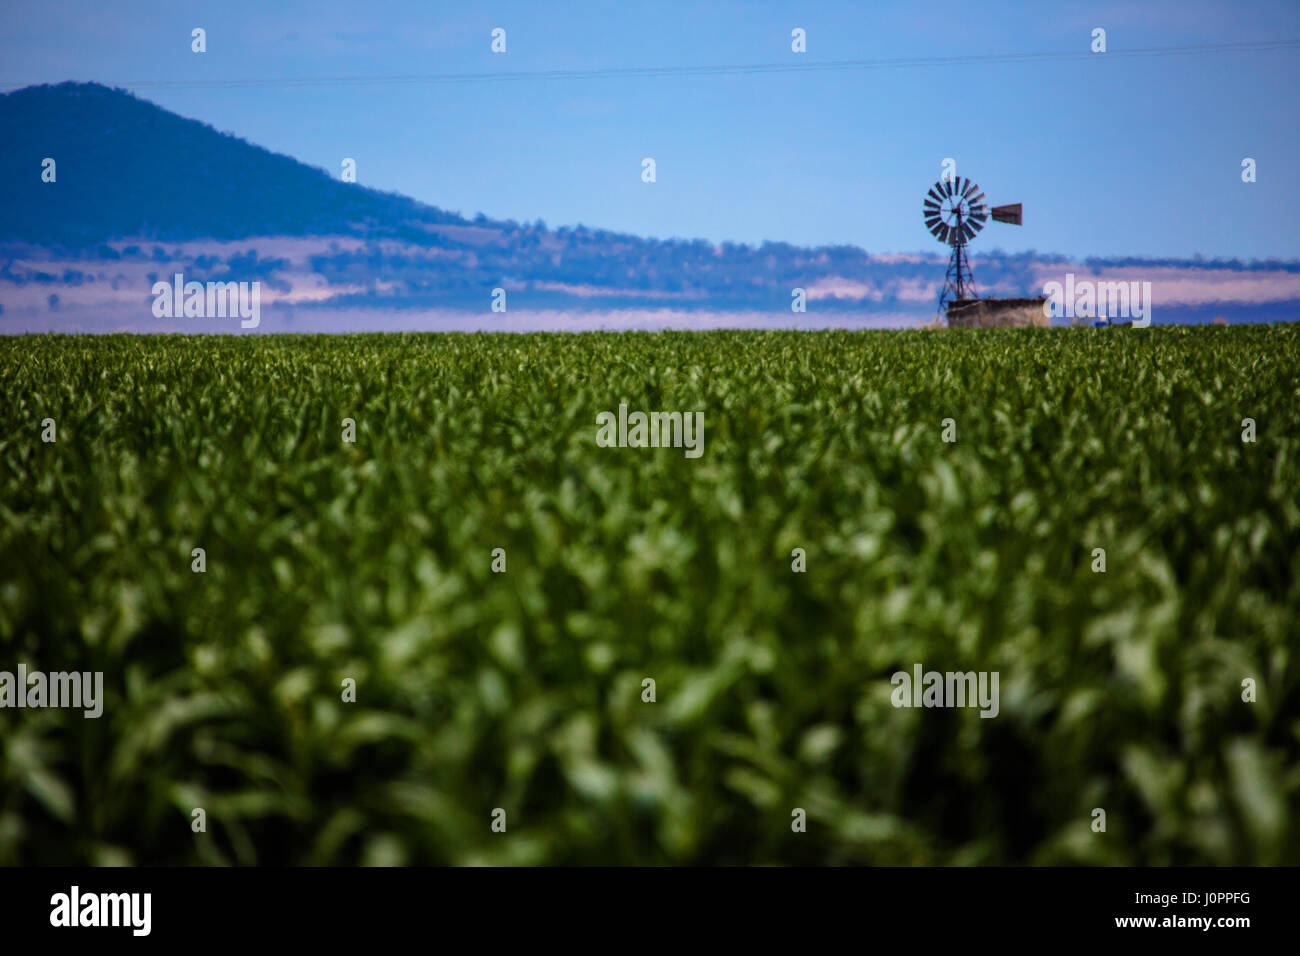 A windmill sits in the distance of waiting crop. Liverpool Plains, Australia Stock Photo